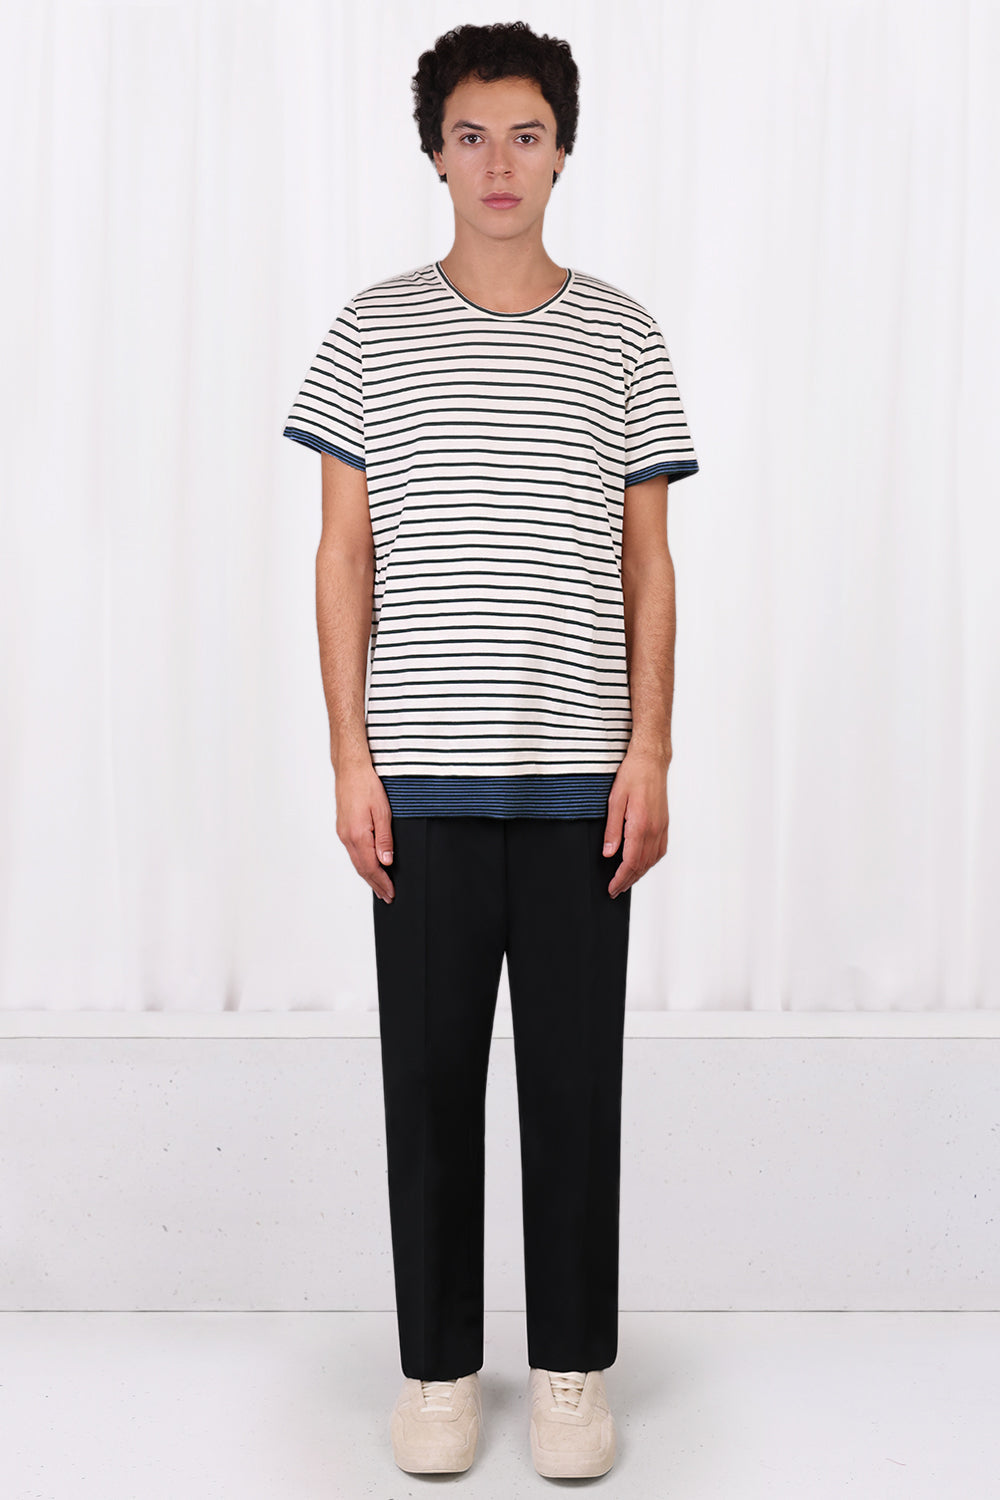 MM6 BY MAISON MARGIELA T-SHIRTS CONTRAST STRIPE S/SLV T-SHIRT | OFF WHITE/POISON GREEN